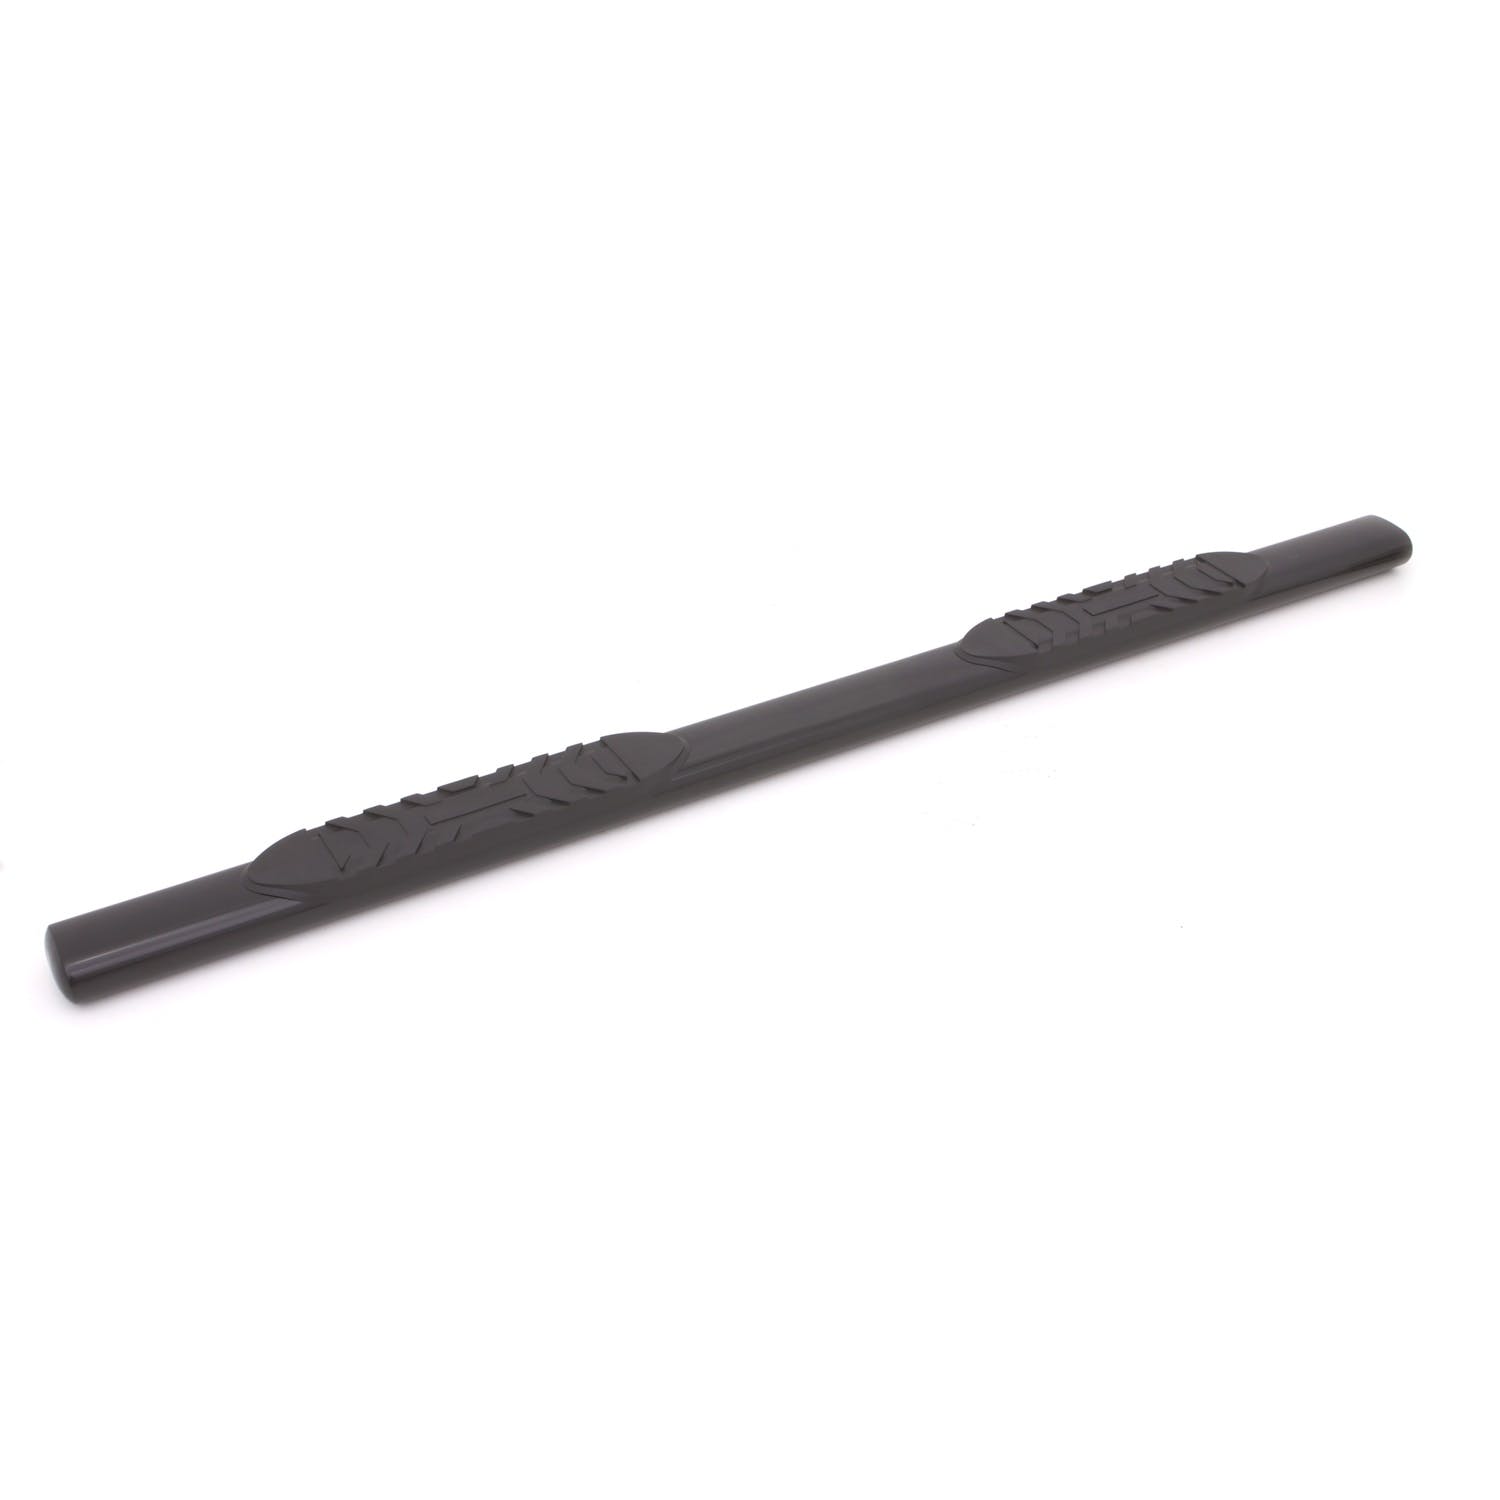 LUND 24076004 5 Inch Oval Straight Nerf Bar - Black 5 In OVAL STRAIGHT STEEL